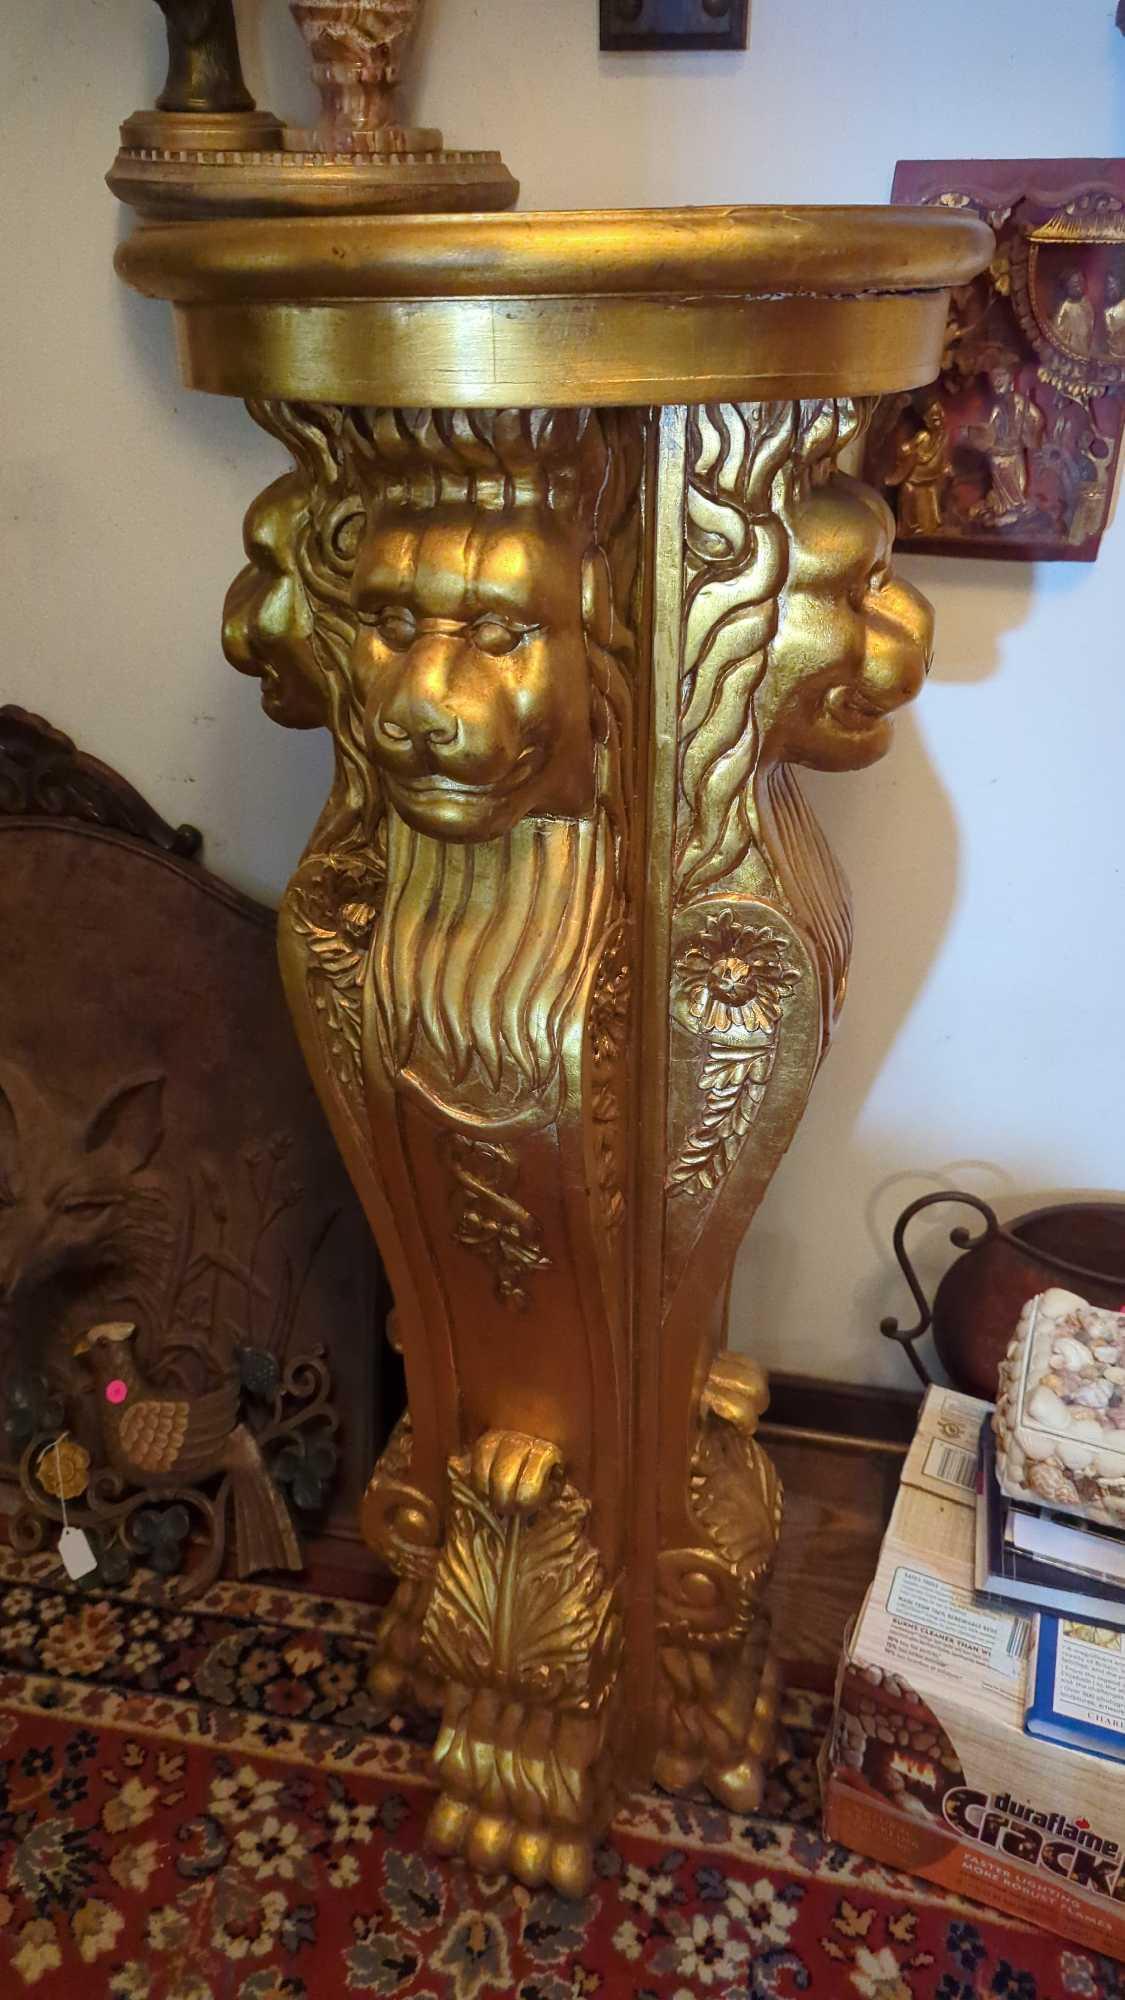 (FOY) EXQUISITE GOLDEN PEDESTAL ADORNED WITH INTRICATE CARVINGS, INCLUDING A LION'S HEAD AND FLORAL